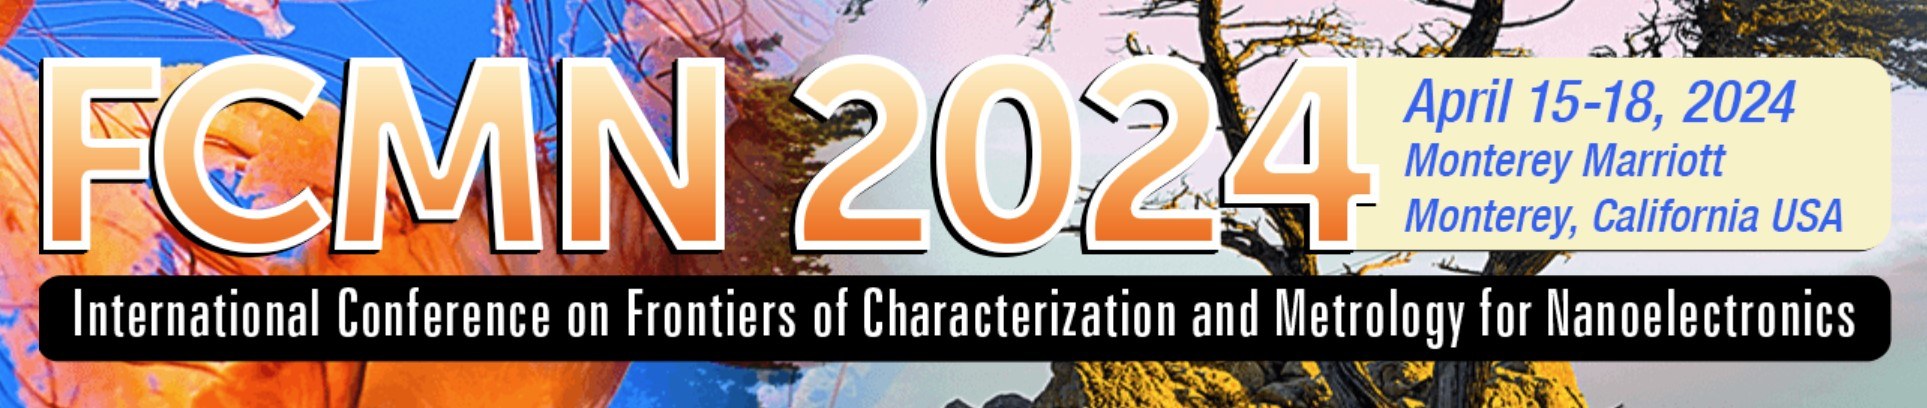 International Conference on Frontiers of Characterization and Metrology for Nanoelectronics - FCMN 2024